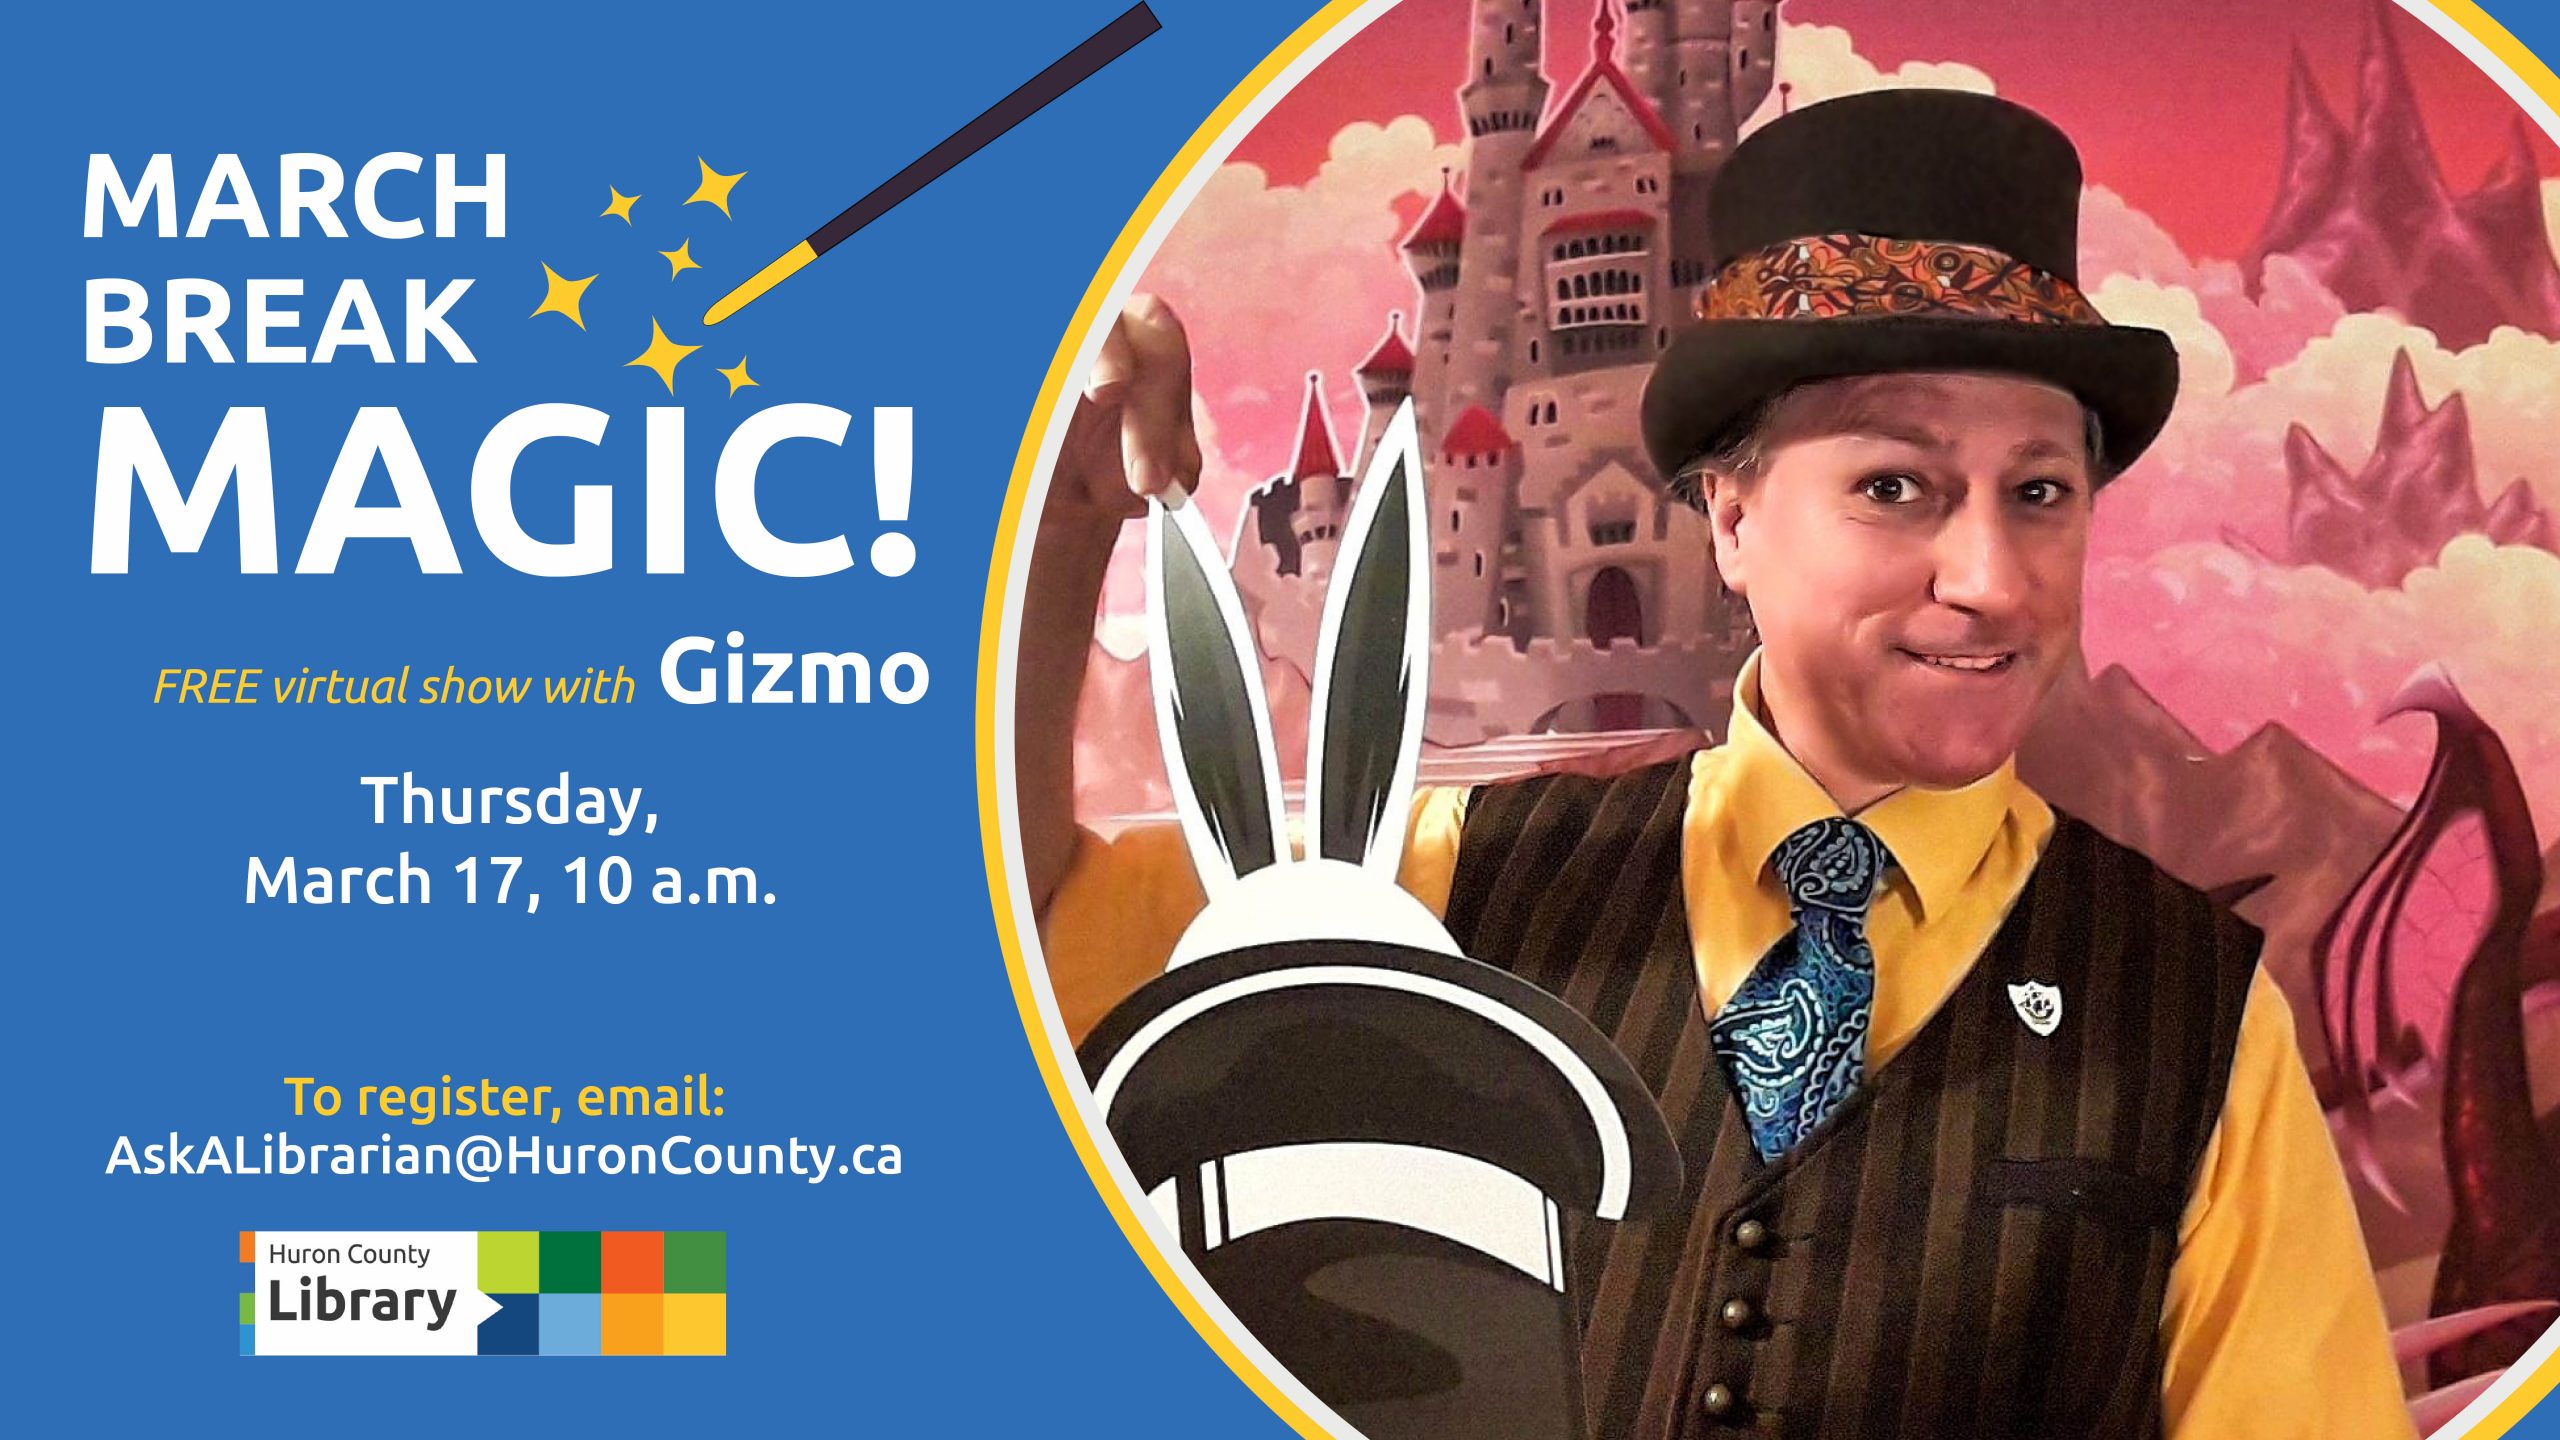 Graphic featuring image of Gizmo the magician and text describing magic show